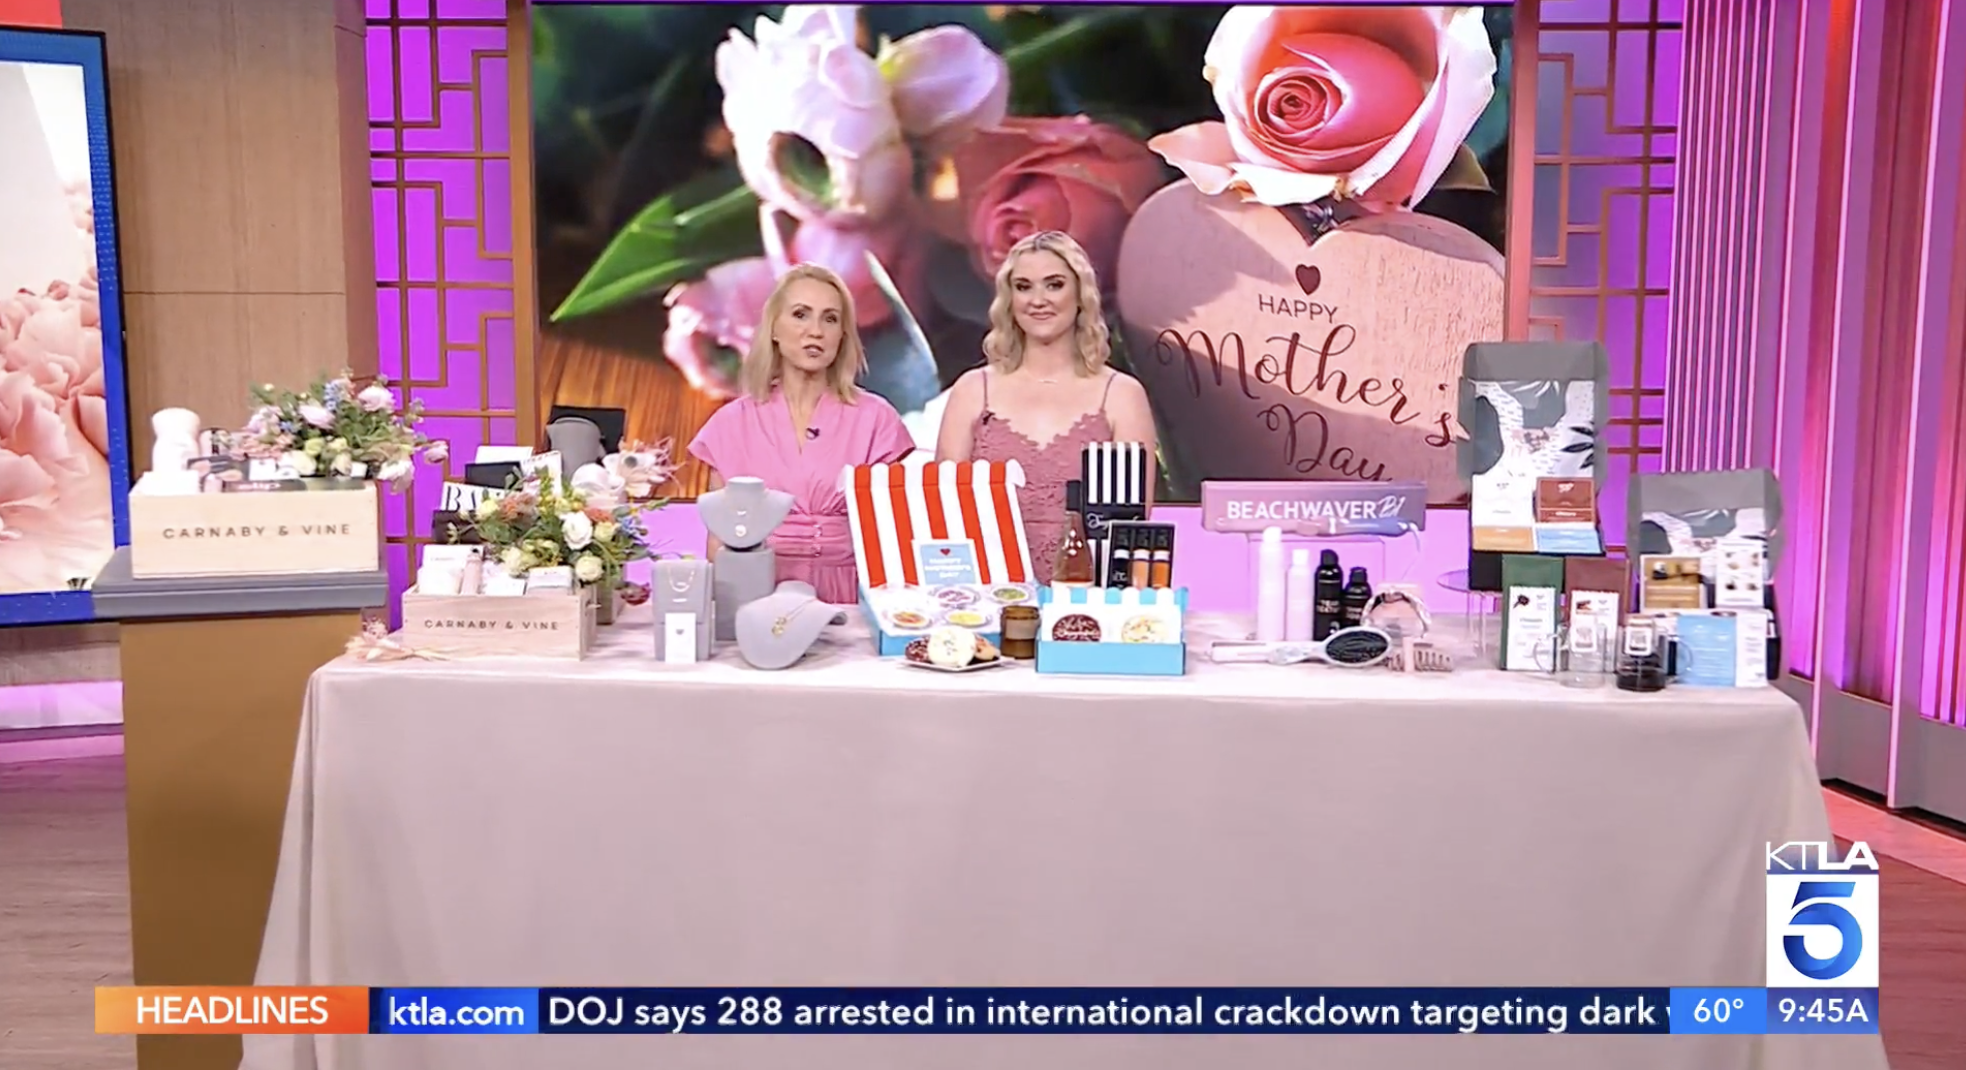 KTLA: Mother’s Day Gifts Created by Moms Millennial Mom